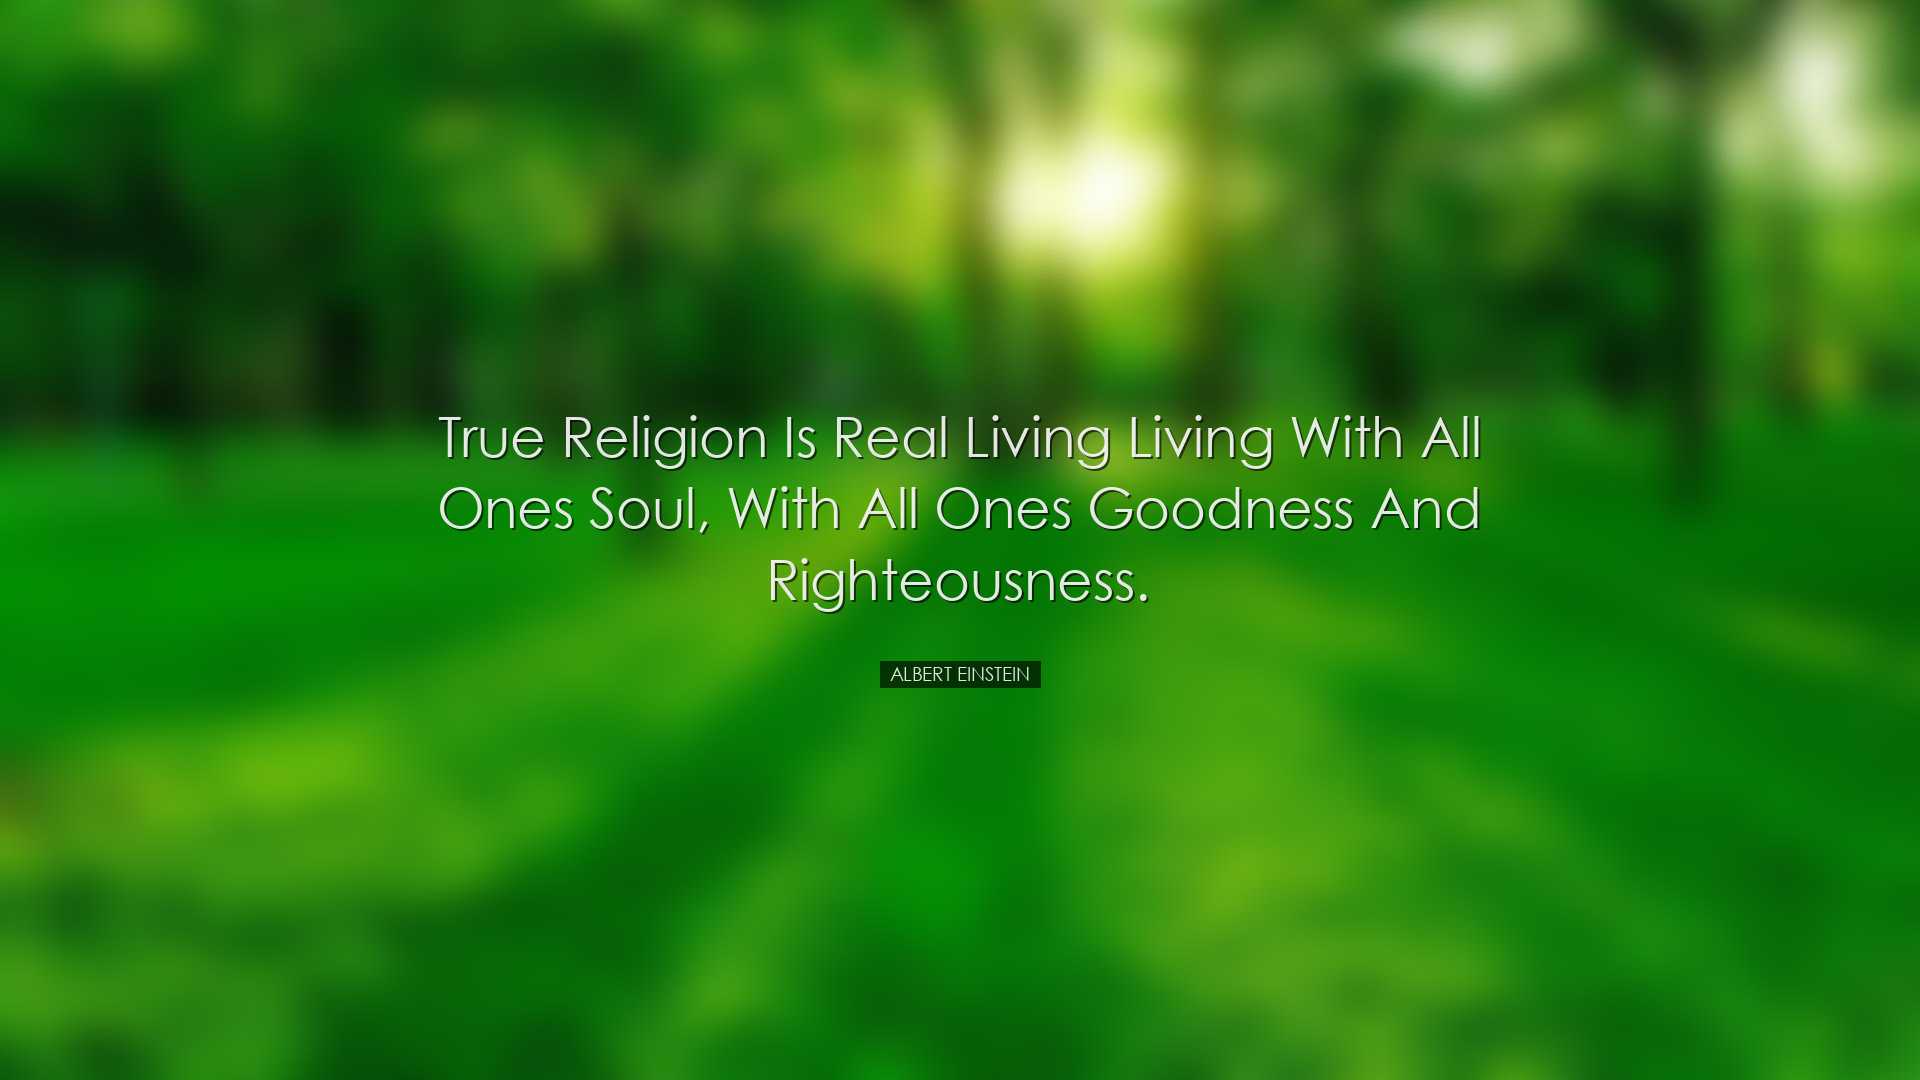 True religion is real living living with all ones soul, with all o